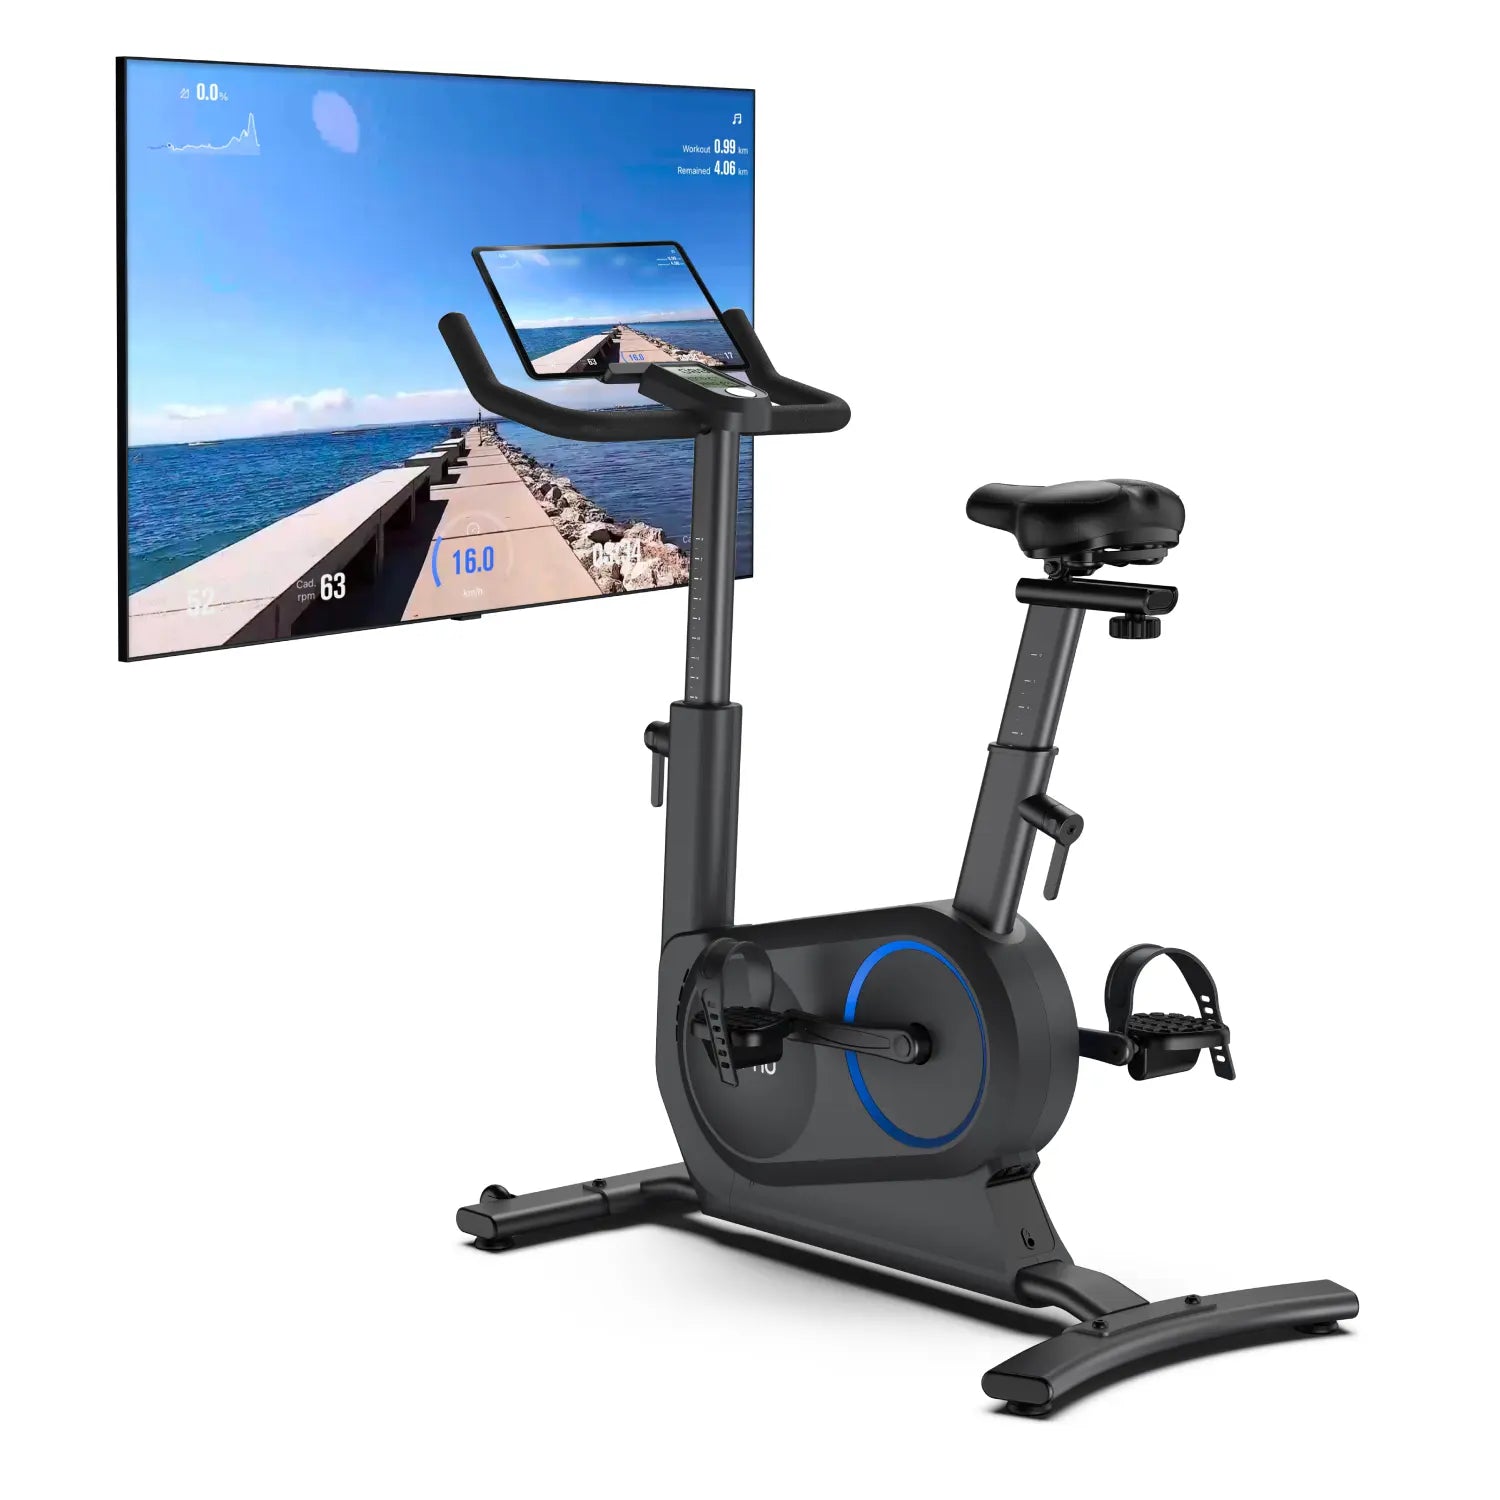 The Renpho EU AI Smart Bike S is a stationary exercise bike with a digital display screen attached in front. The black bike, featuring blue detailing and an adjustable seat post, offers diverse training programs for a varied workout. The screen shows a scenic cycling route alongside statistics, providing an immersive fitness experience. Sturdy base and ergonomic design included.